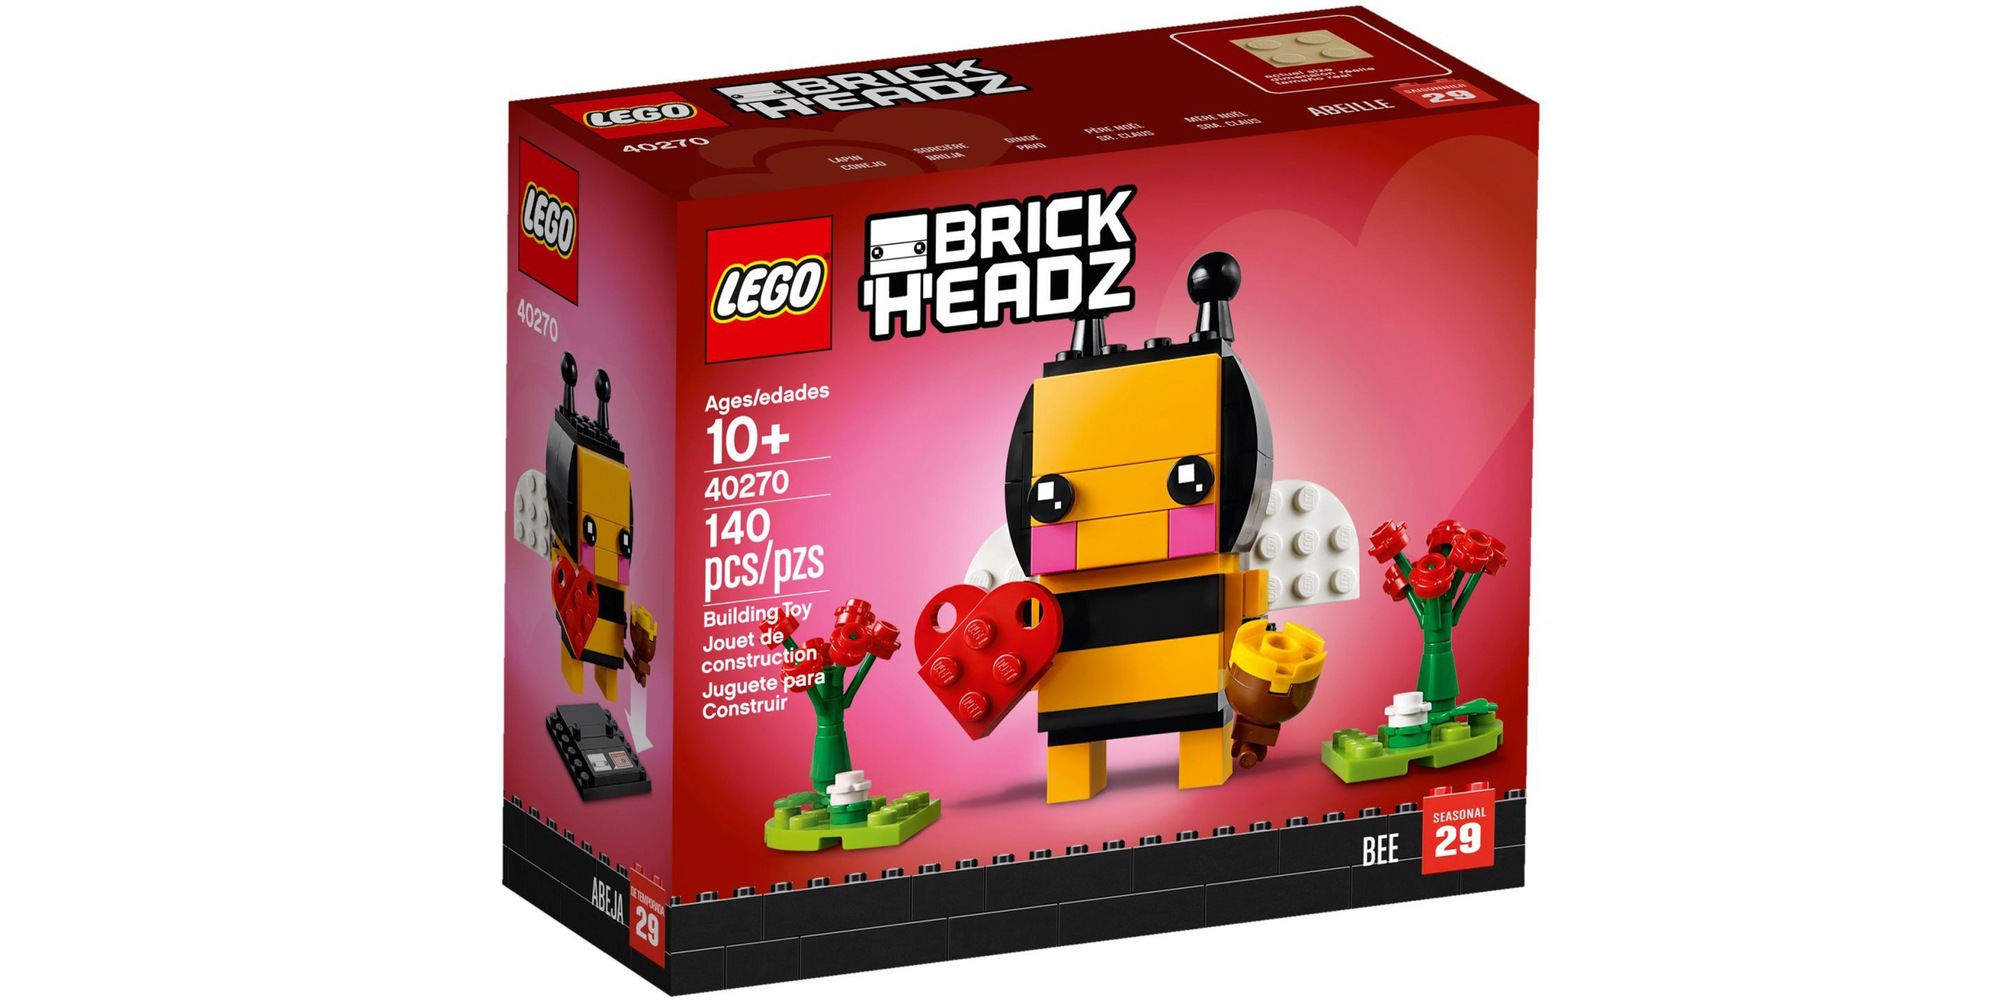 Tick Enlighten Udover LEGO prepares for 2018 with announcement of 6 new holiday-themed BrickHeadz  kits